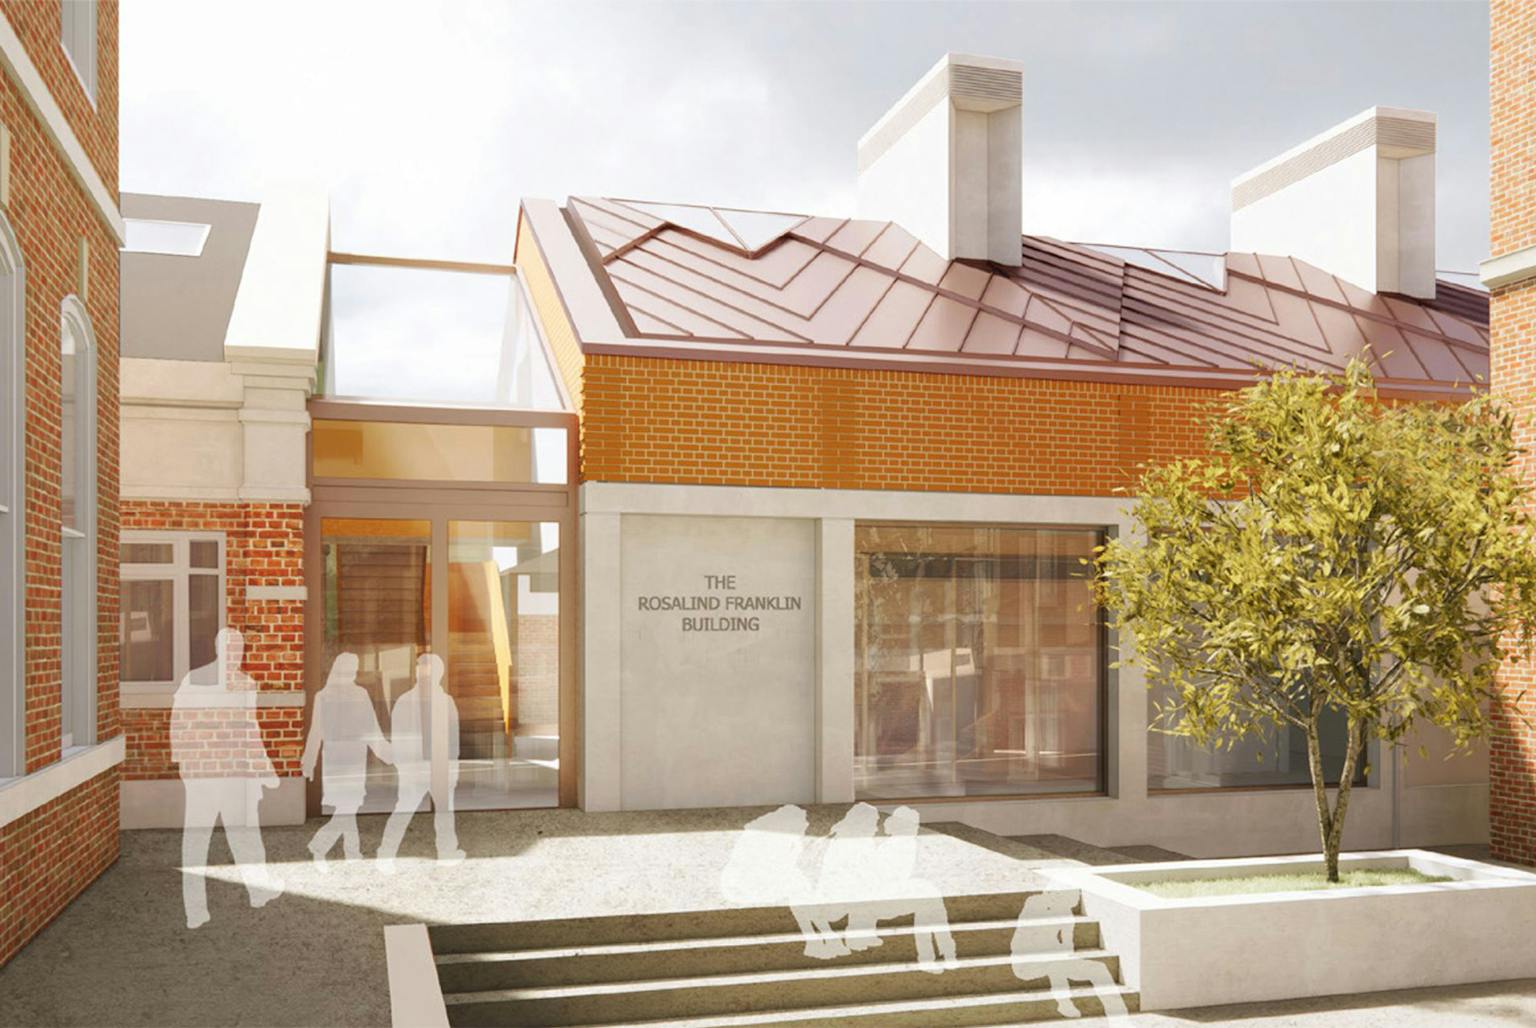 St Paul’s Girls’ School renderings, courtesy of Jestico + Whiles